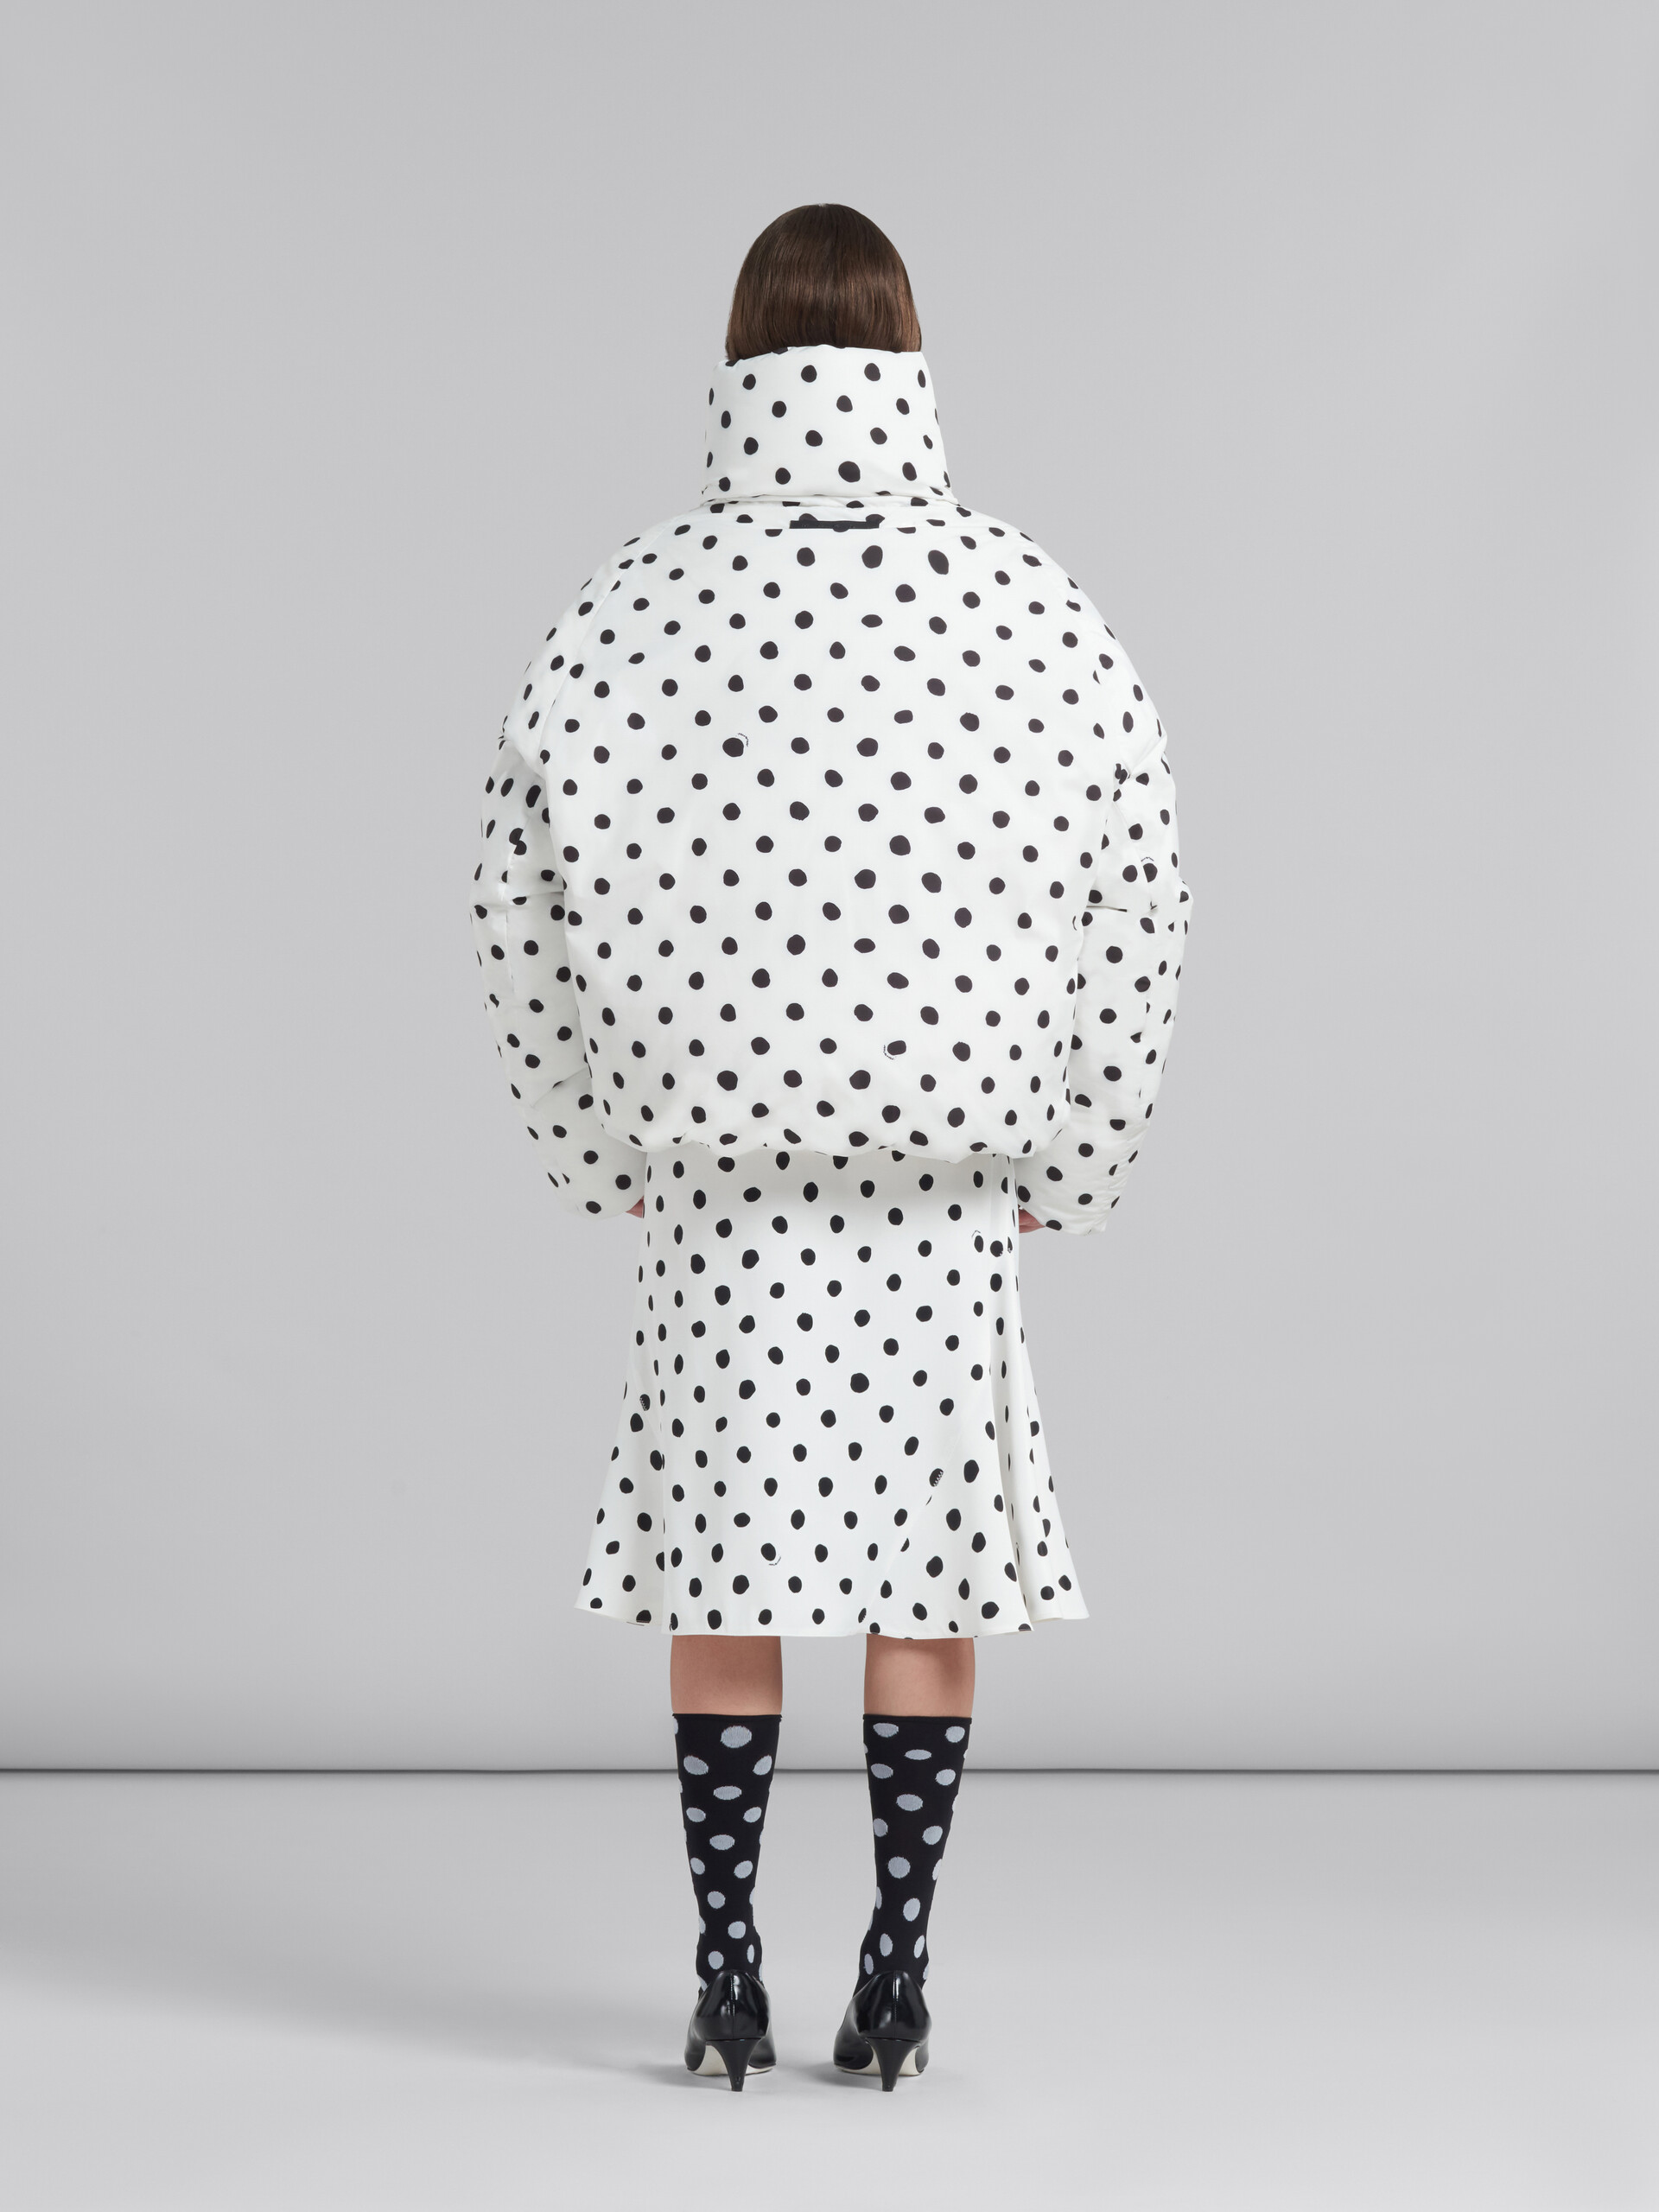 White oversized down jacket with polka dots - Winter jackets - Image 3